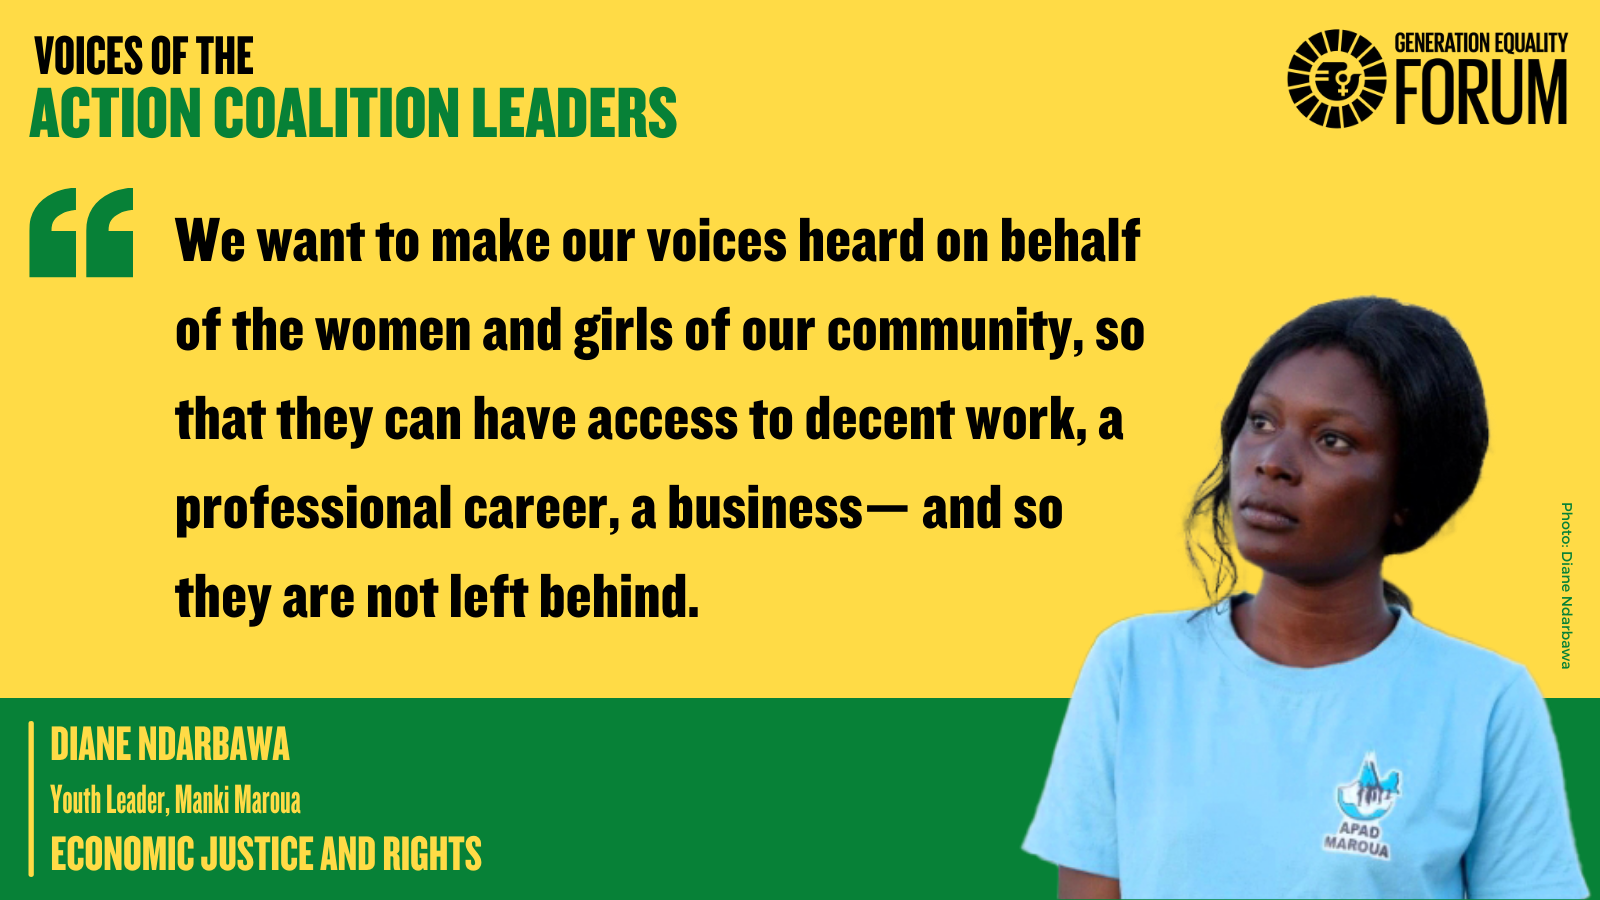 "We want to make our voices heard on behalf of the women and girls of our community, so that they can have access to decent work, a professional career, a business - and so they are not left behind." - Diane Ndarbawa